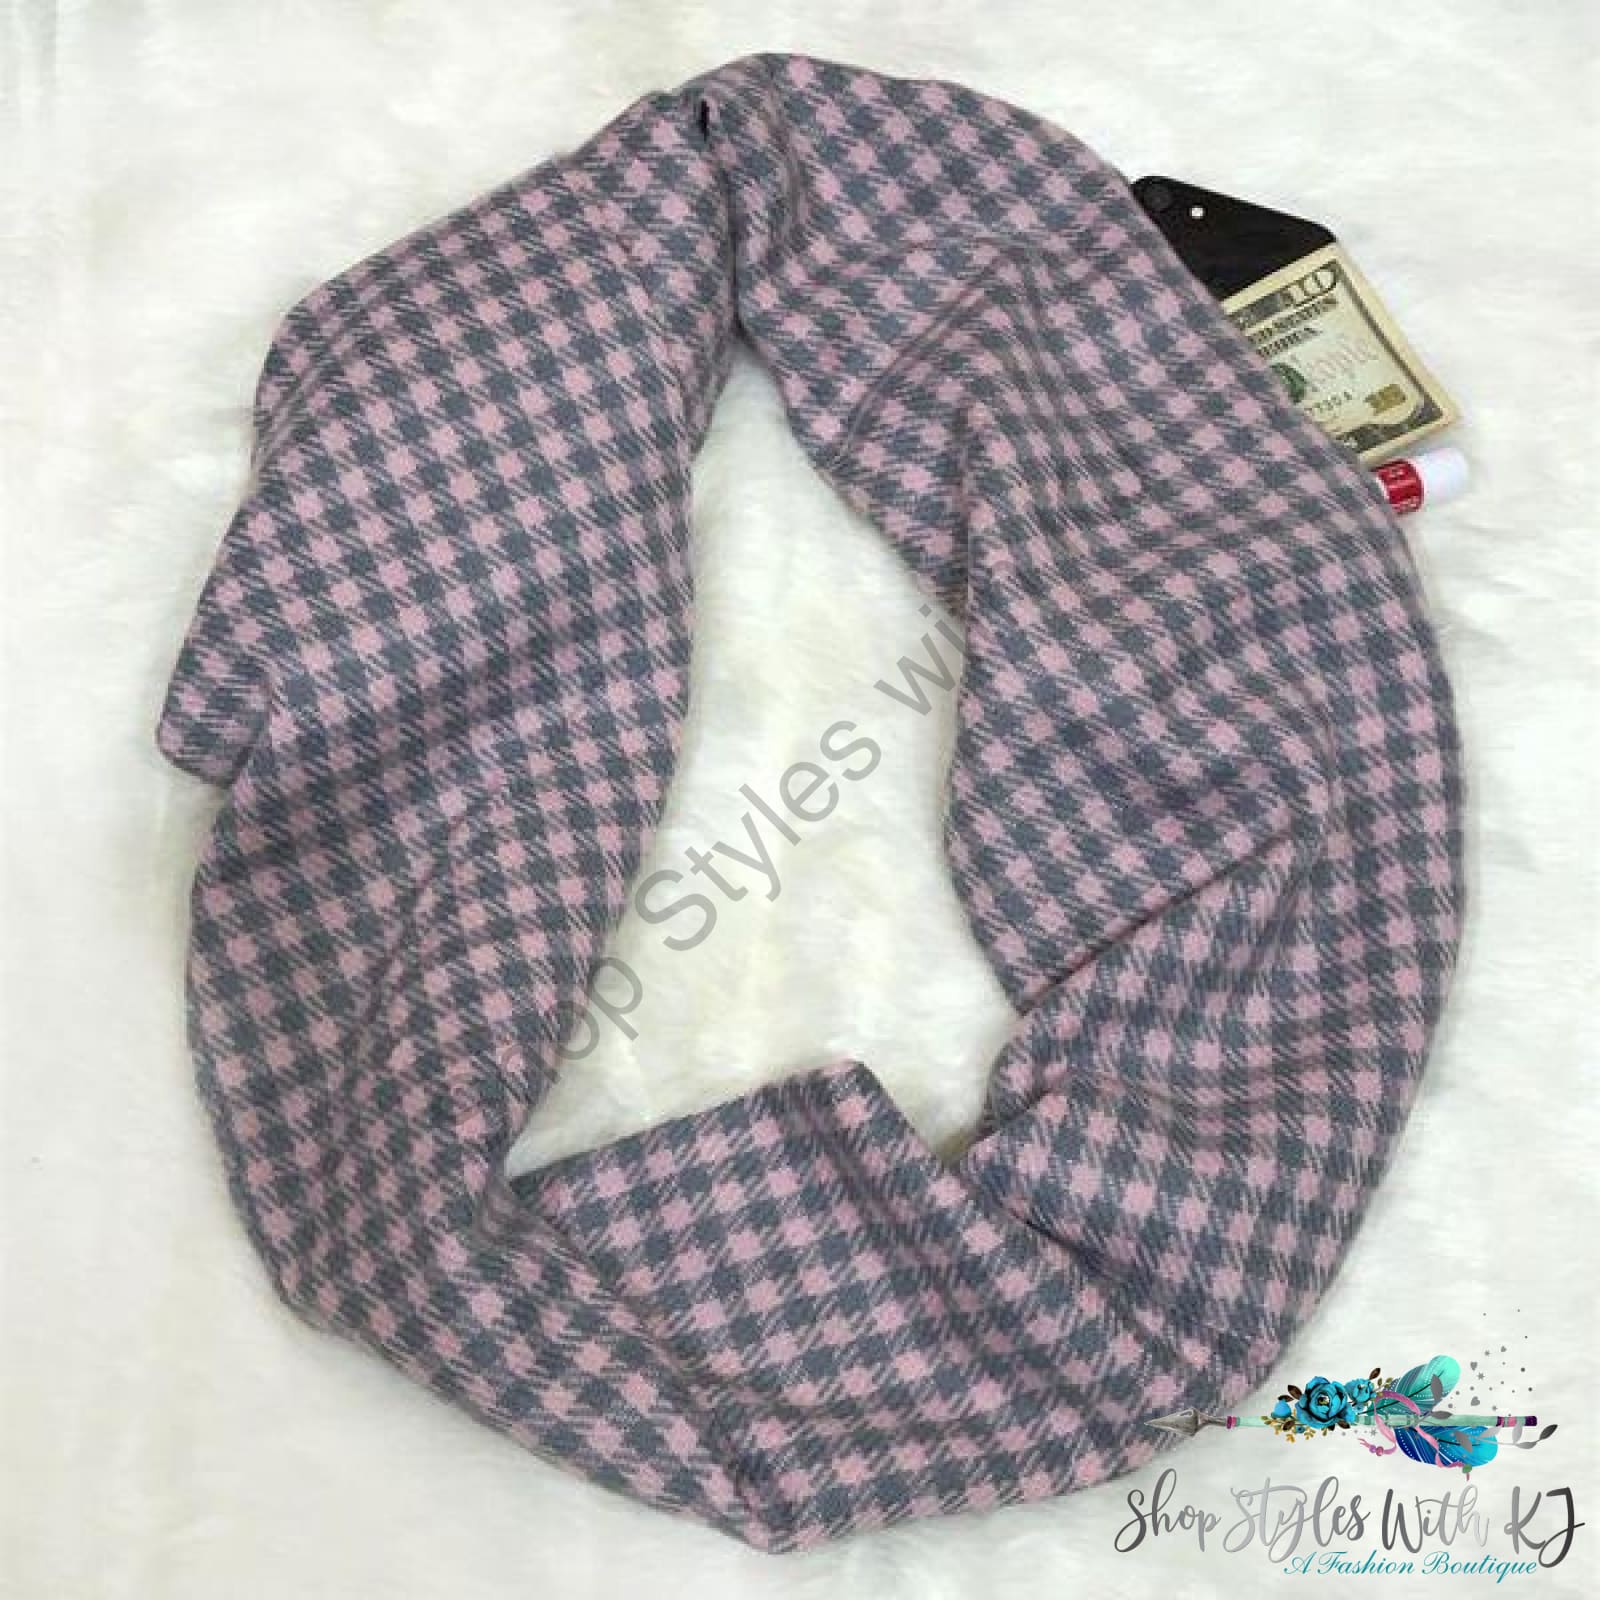 Checkered Infinity Scarf Grey/pink Scarf